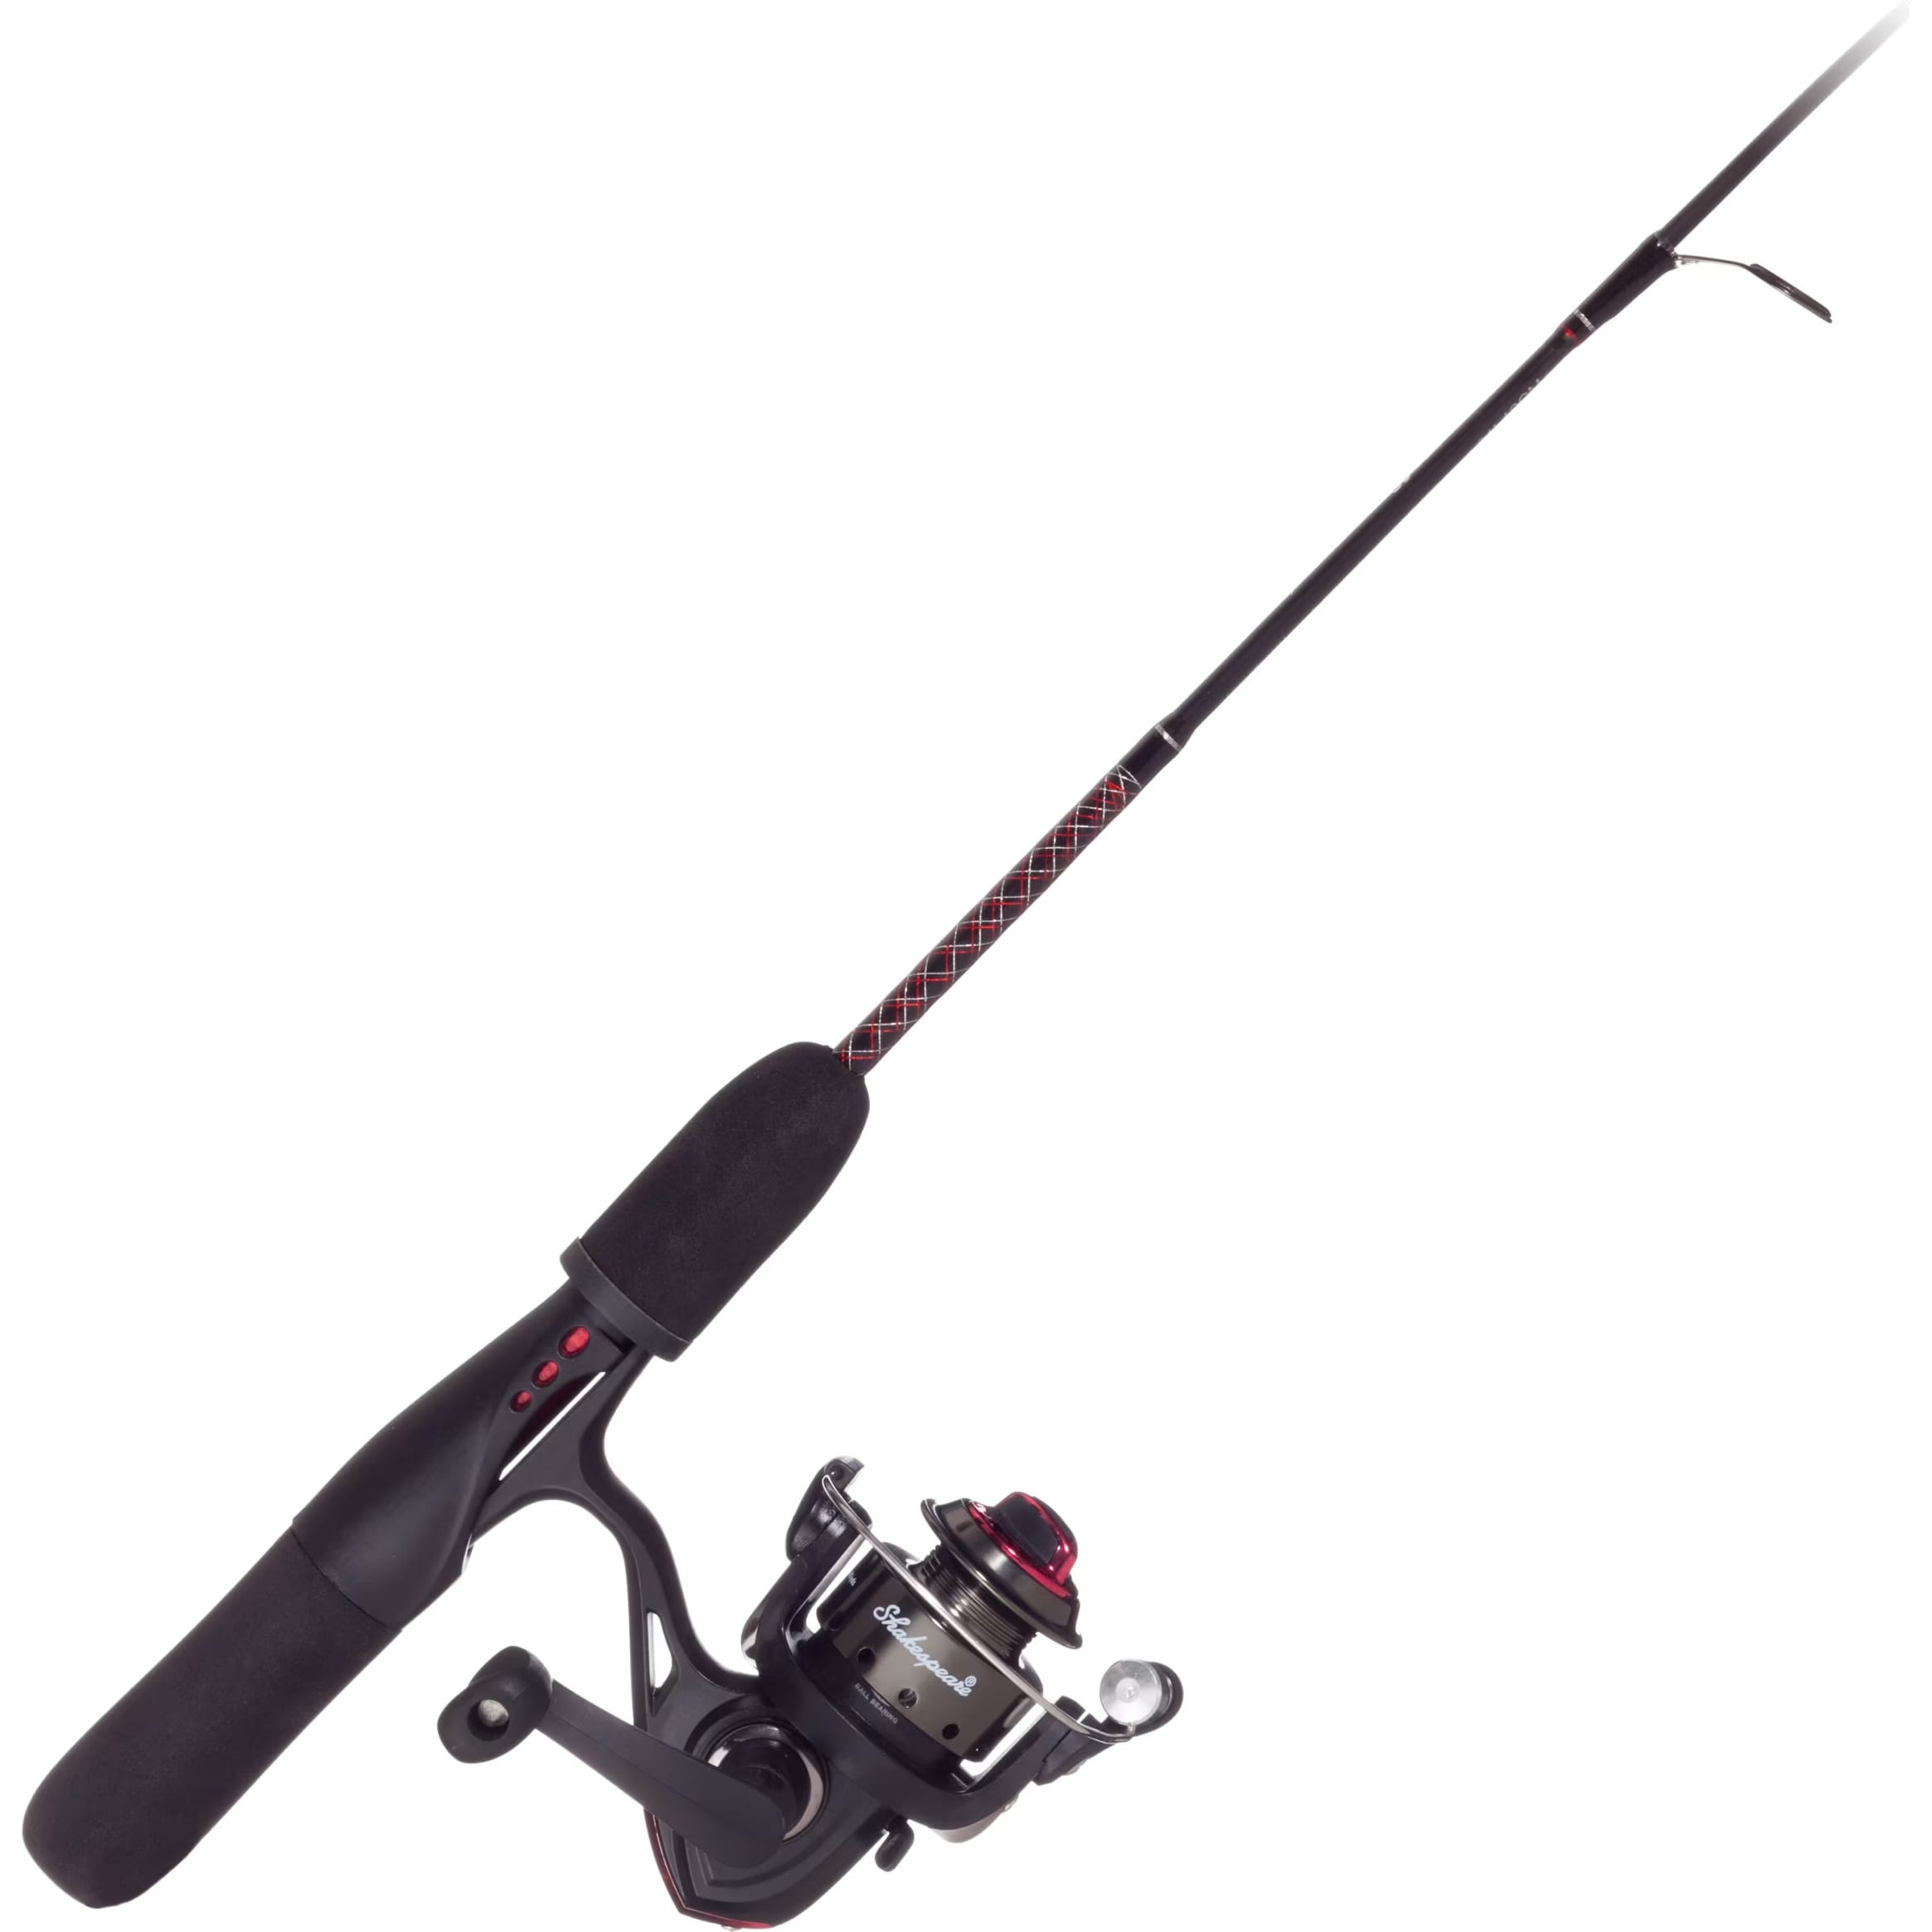 Best Ice Fishing Rod & Reel Combos: Ice Rod & Reel Combos for